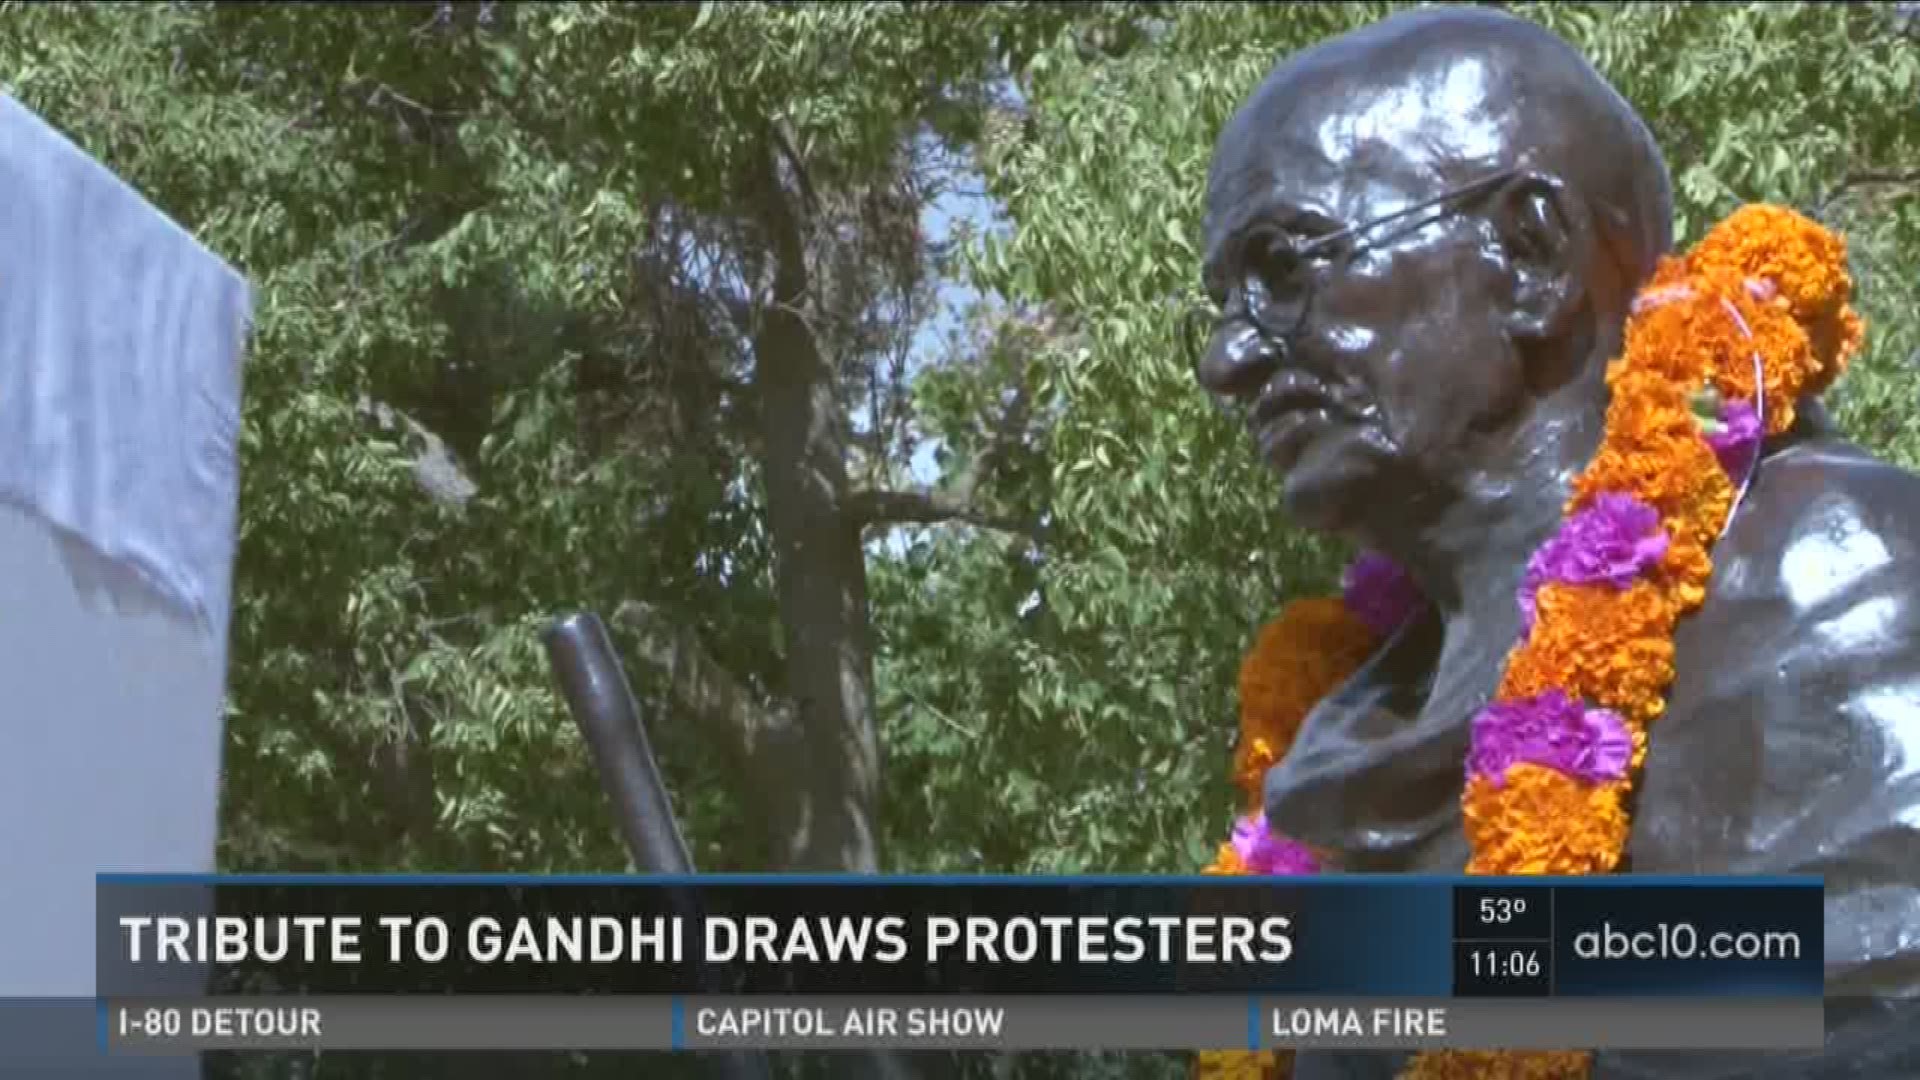 Protesters is Davis objected to the placement of a Gandhi statue in a city park.